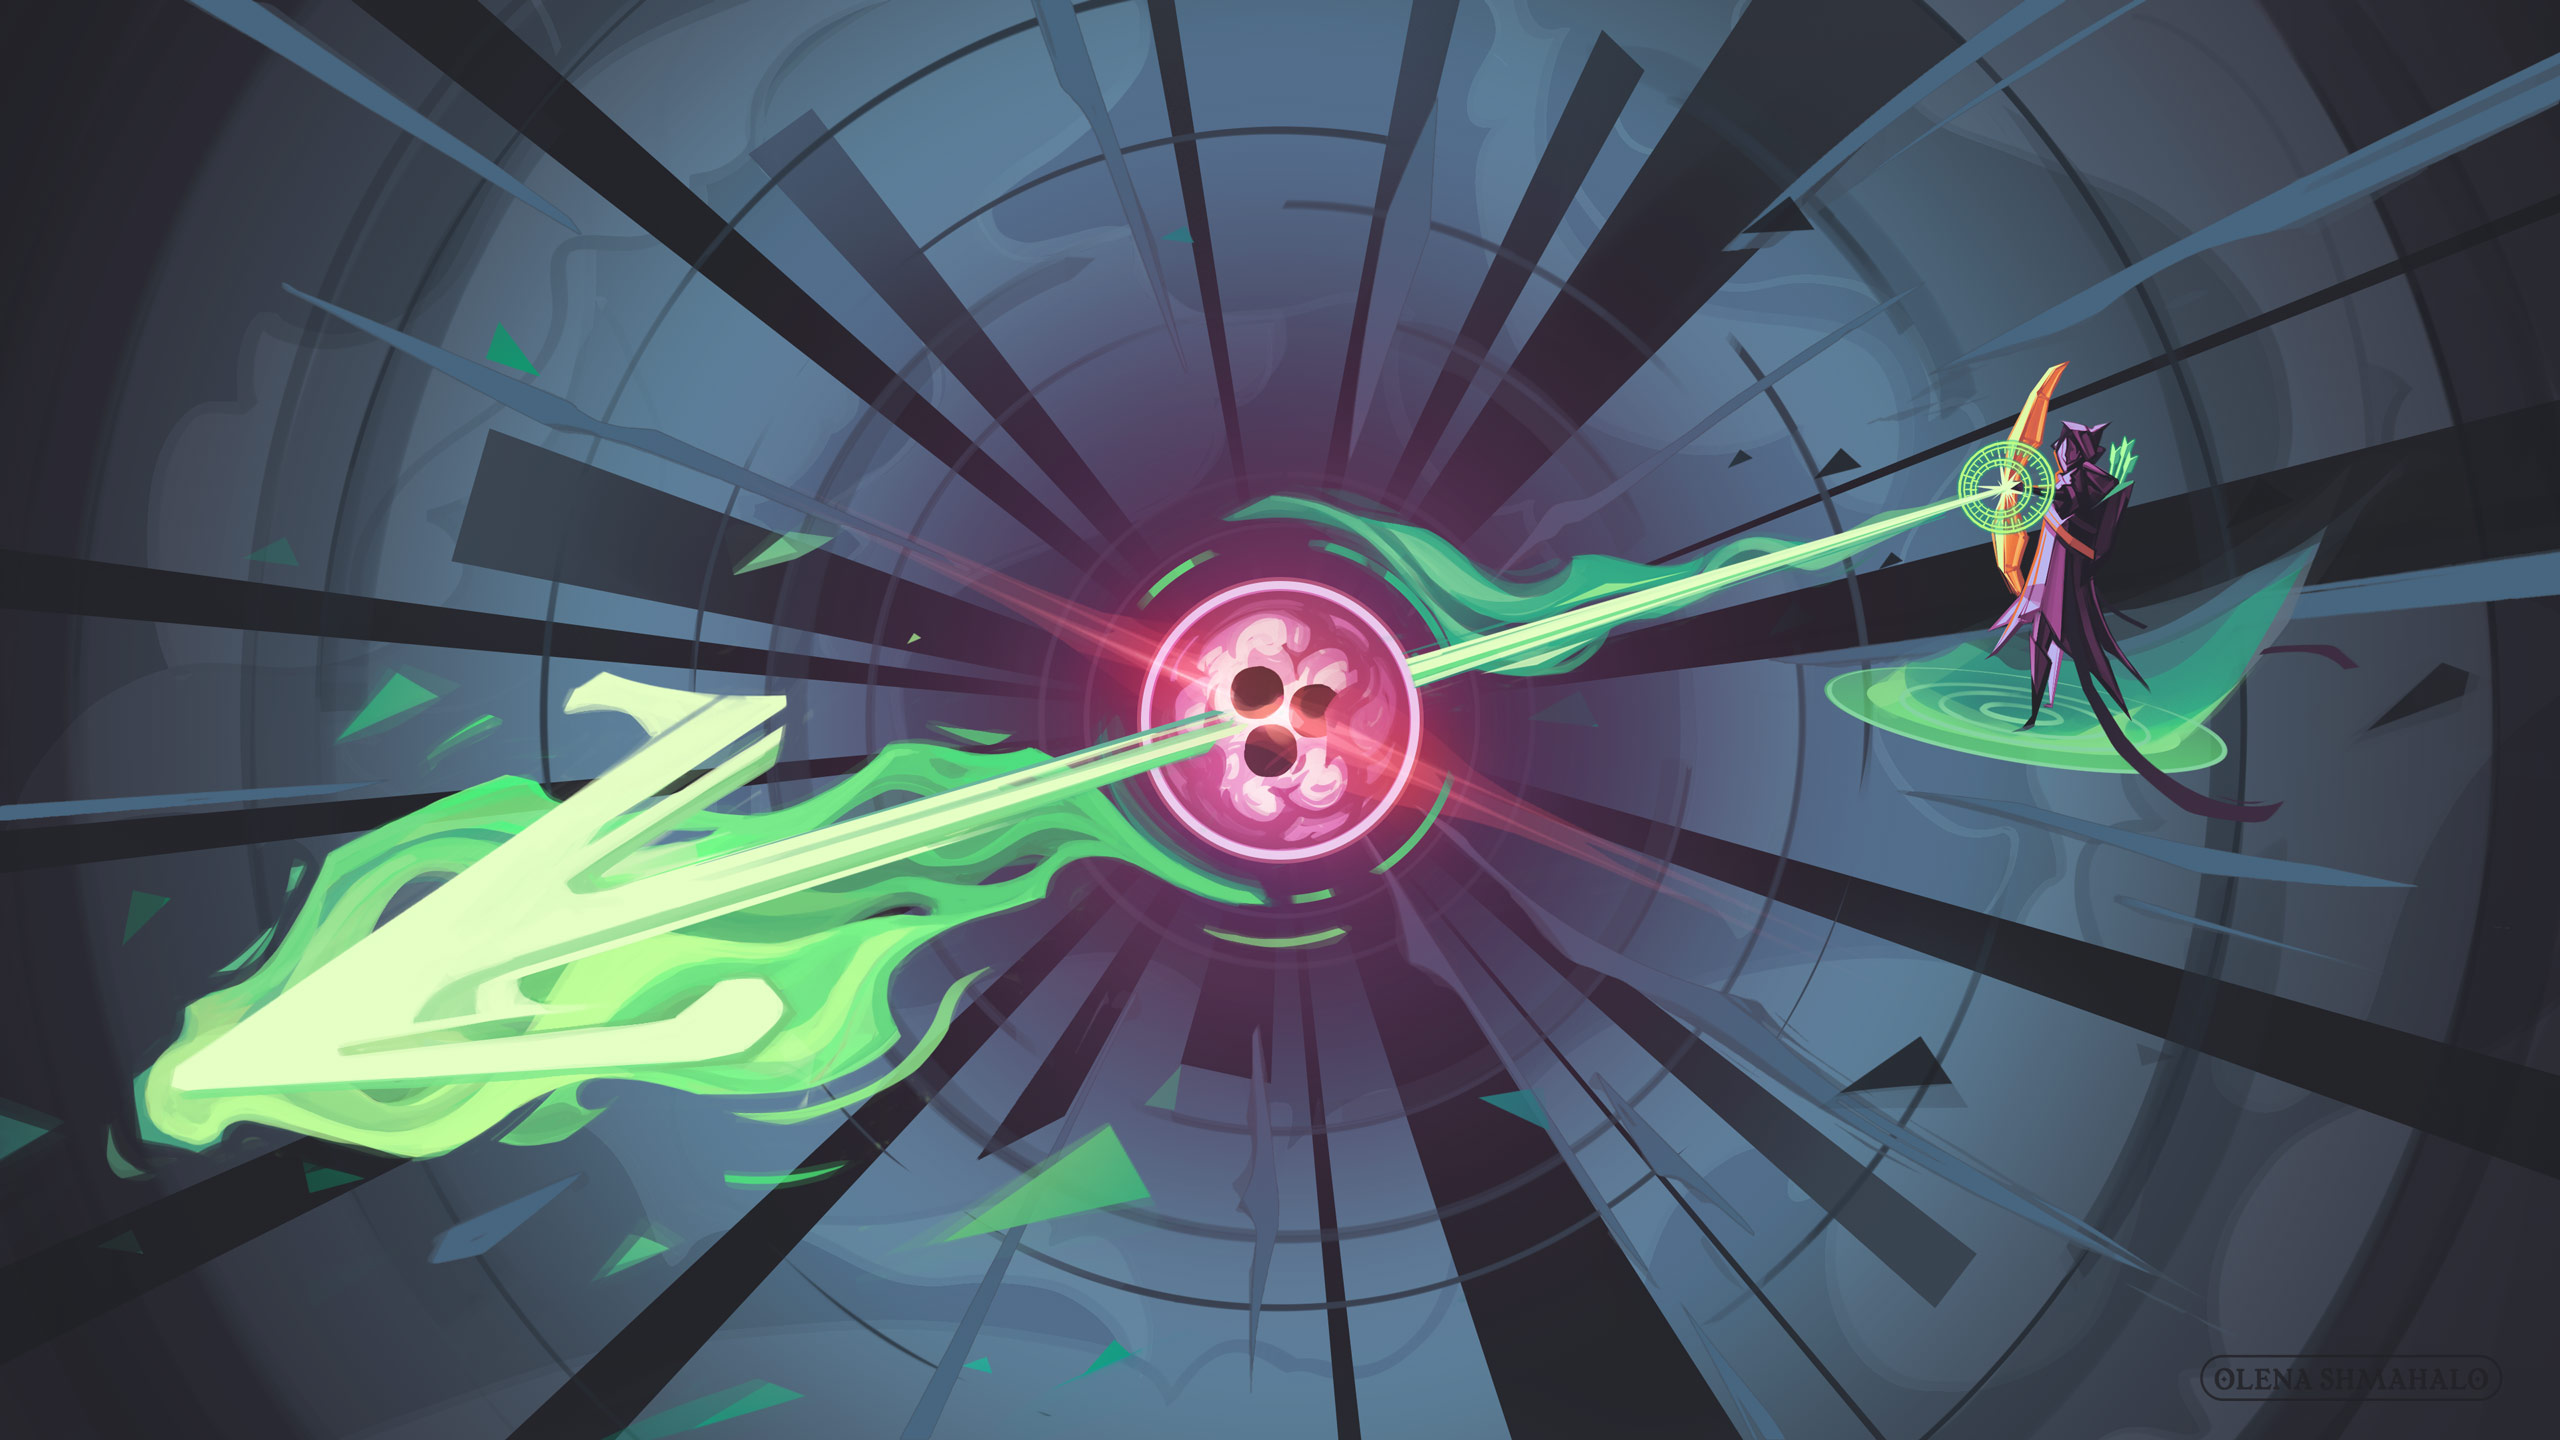 Illustration: an archer shooting a ghostly, neon-green arrow through a central sphere, revealing a proton's interior — 3 quarks. The arrowhead is shaped like the symbol for neutrinos, the Greek letter ν (nu). All on a blue-grey, abstract background with dark rays shooting out from the center.